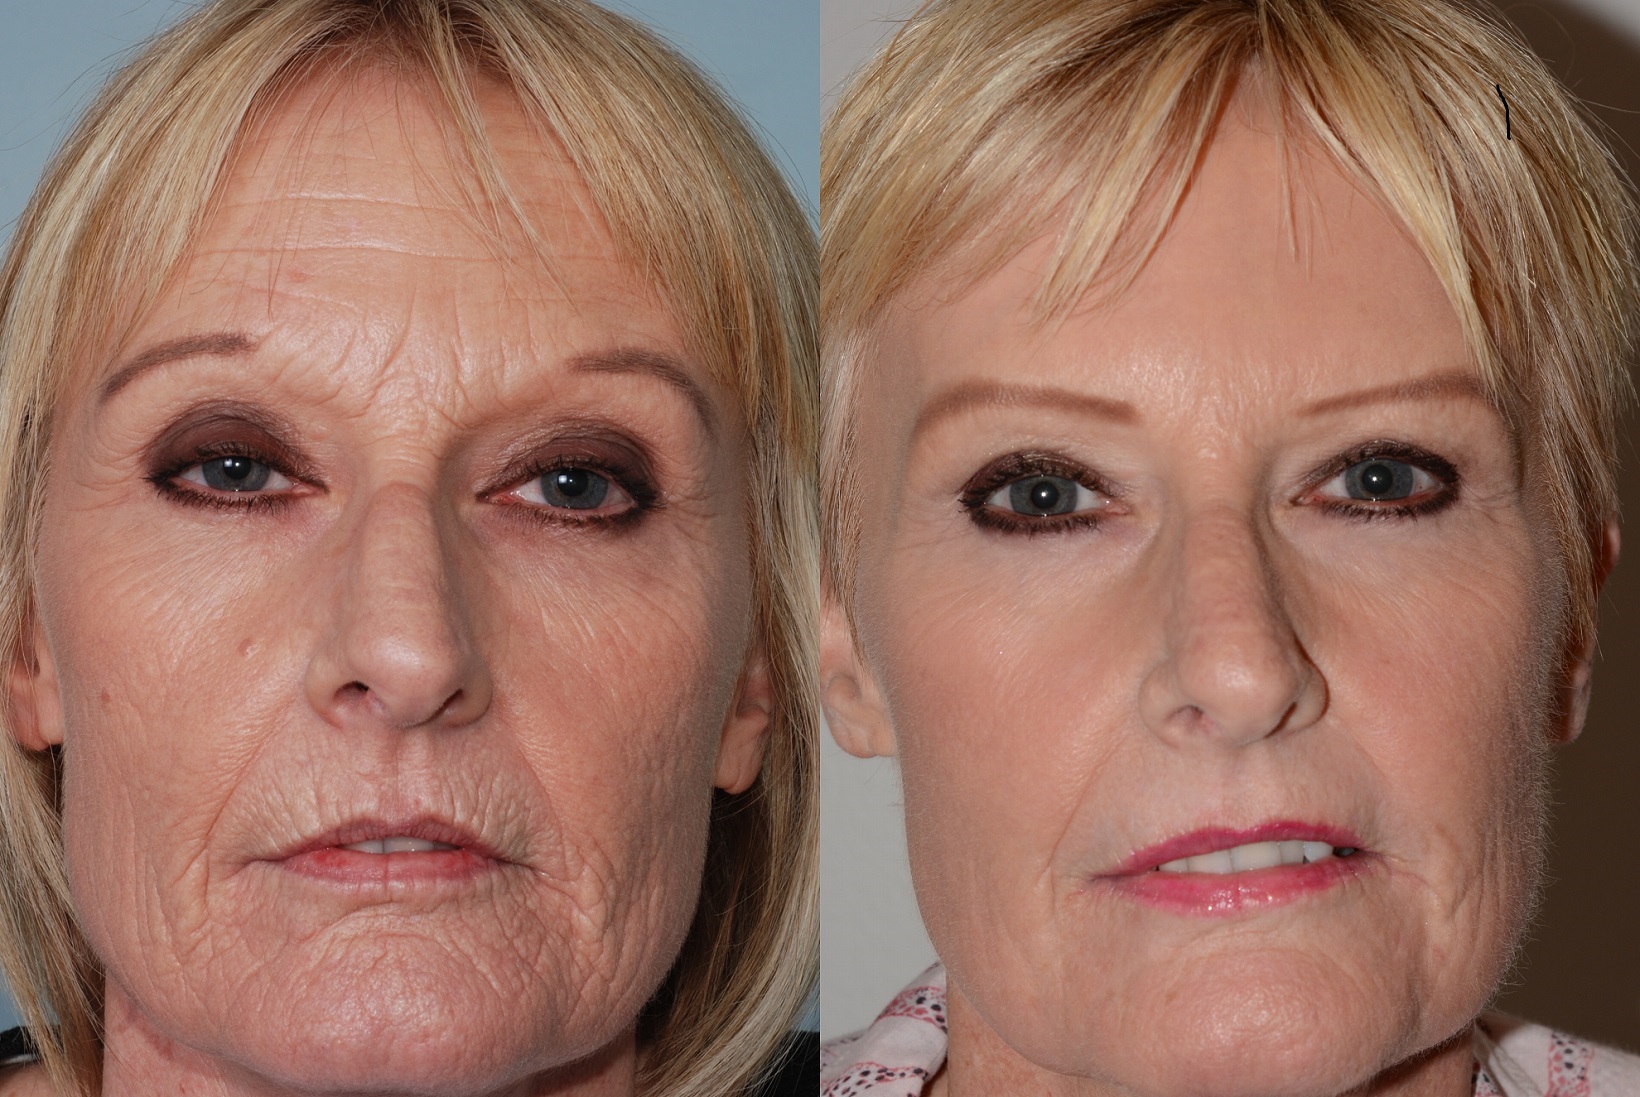 Before (left)_ and after (right) 6 years and 6 months following fully and fractionally ablative laser resurfacing laser blepharoplasty, Nd-YAG laser tightening, Dysport and Filler.